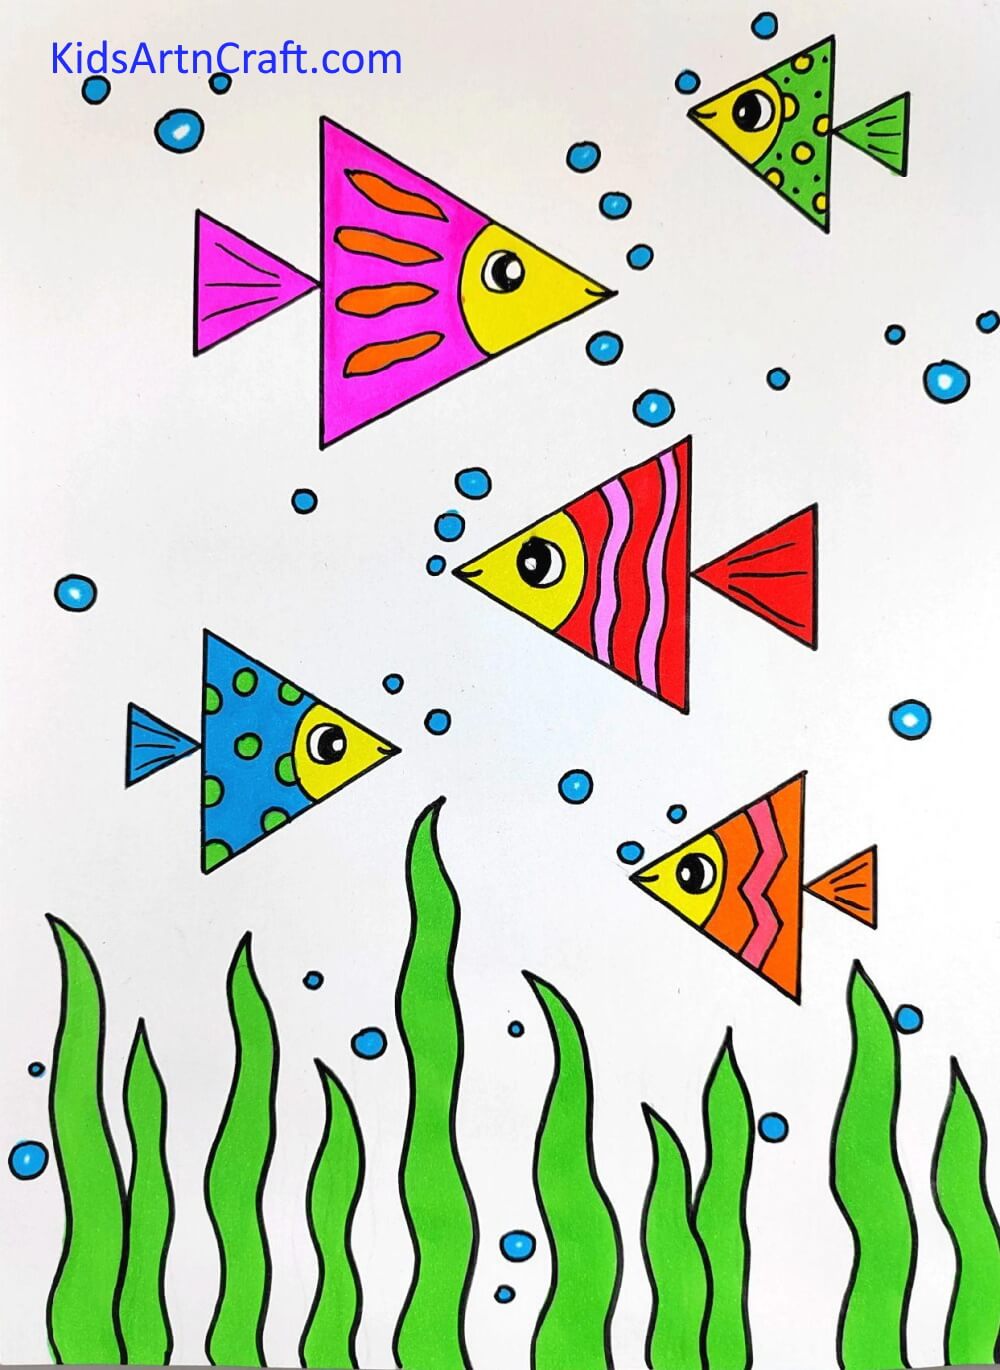 This Is The Final Look Of Our Cute Triangular Fishes! - Follow These Steps to Draw a Triangle Fish